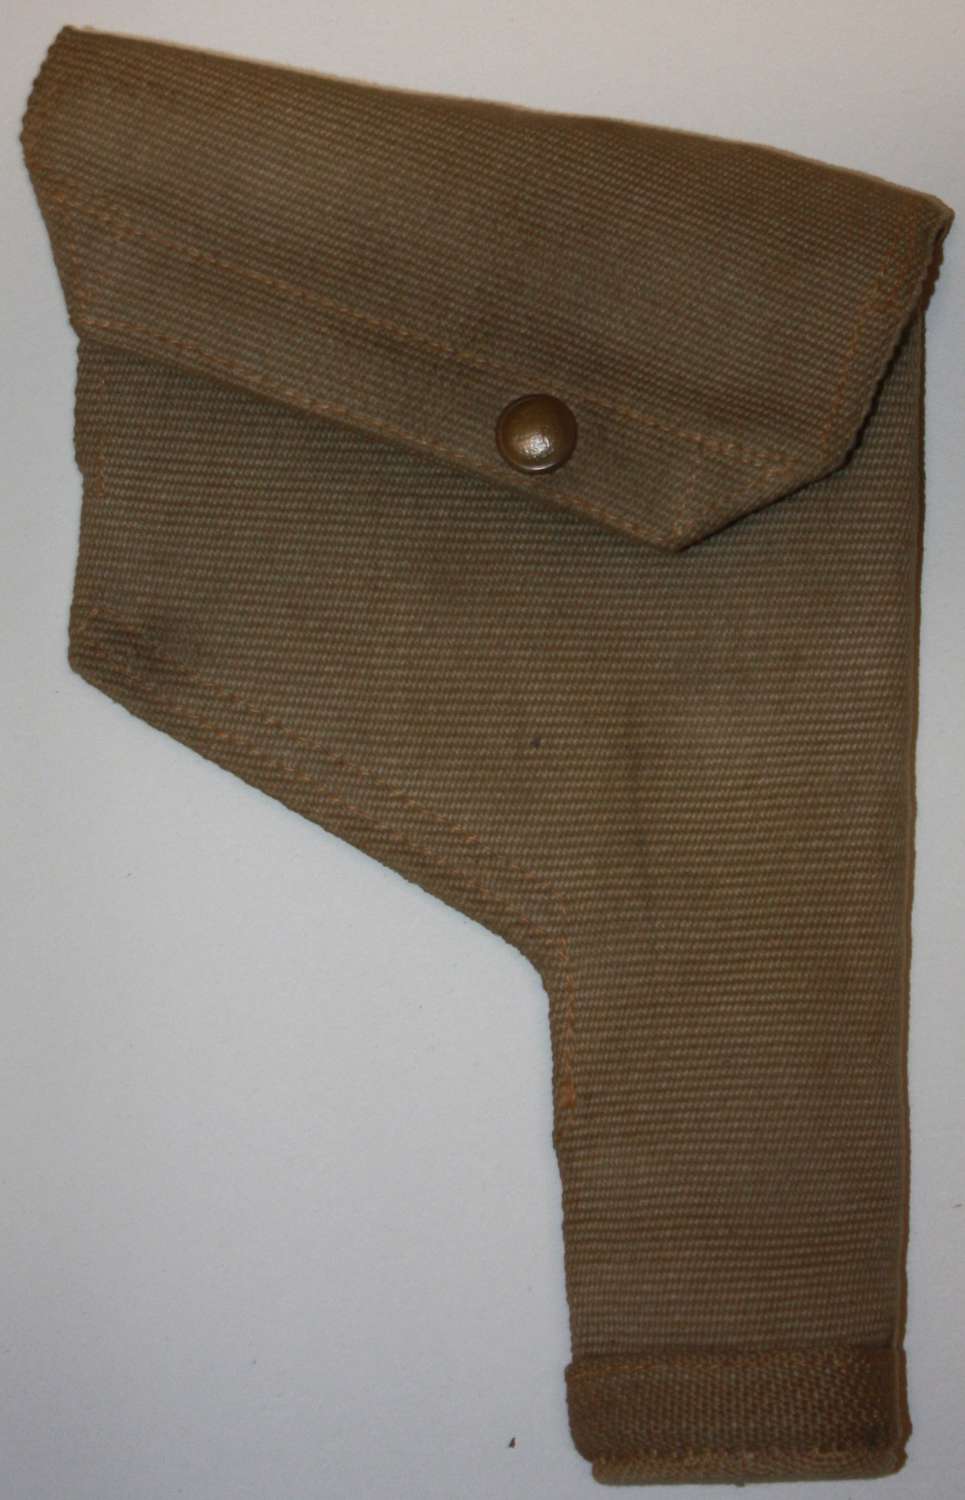 A GOOD 1942 DATED BRITISH 37 PATTERN WEBBING HOLSTER